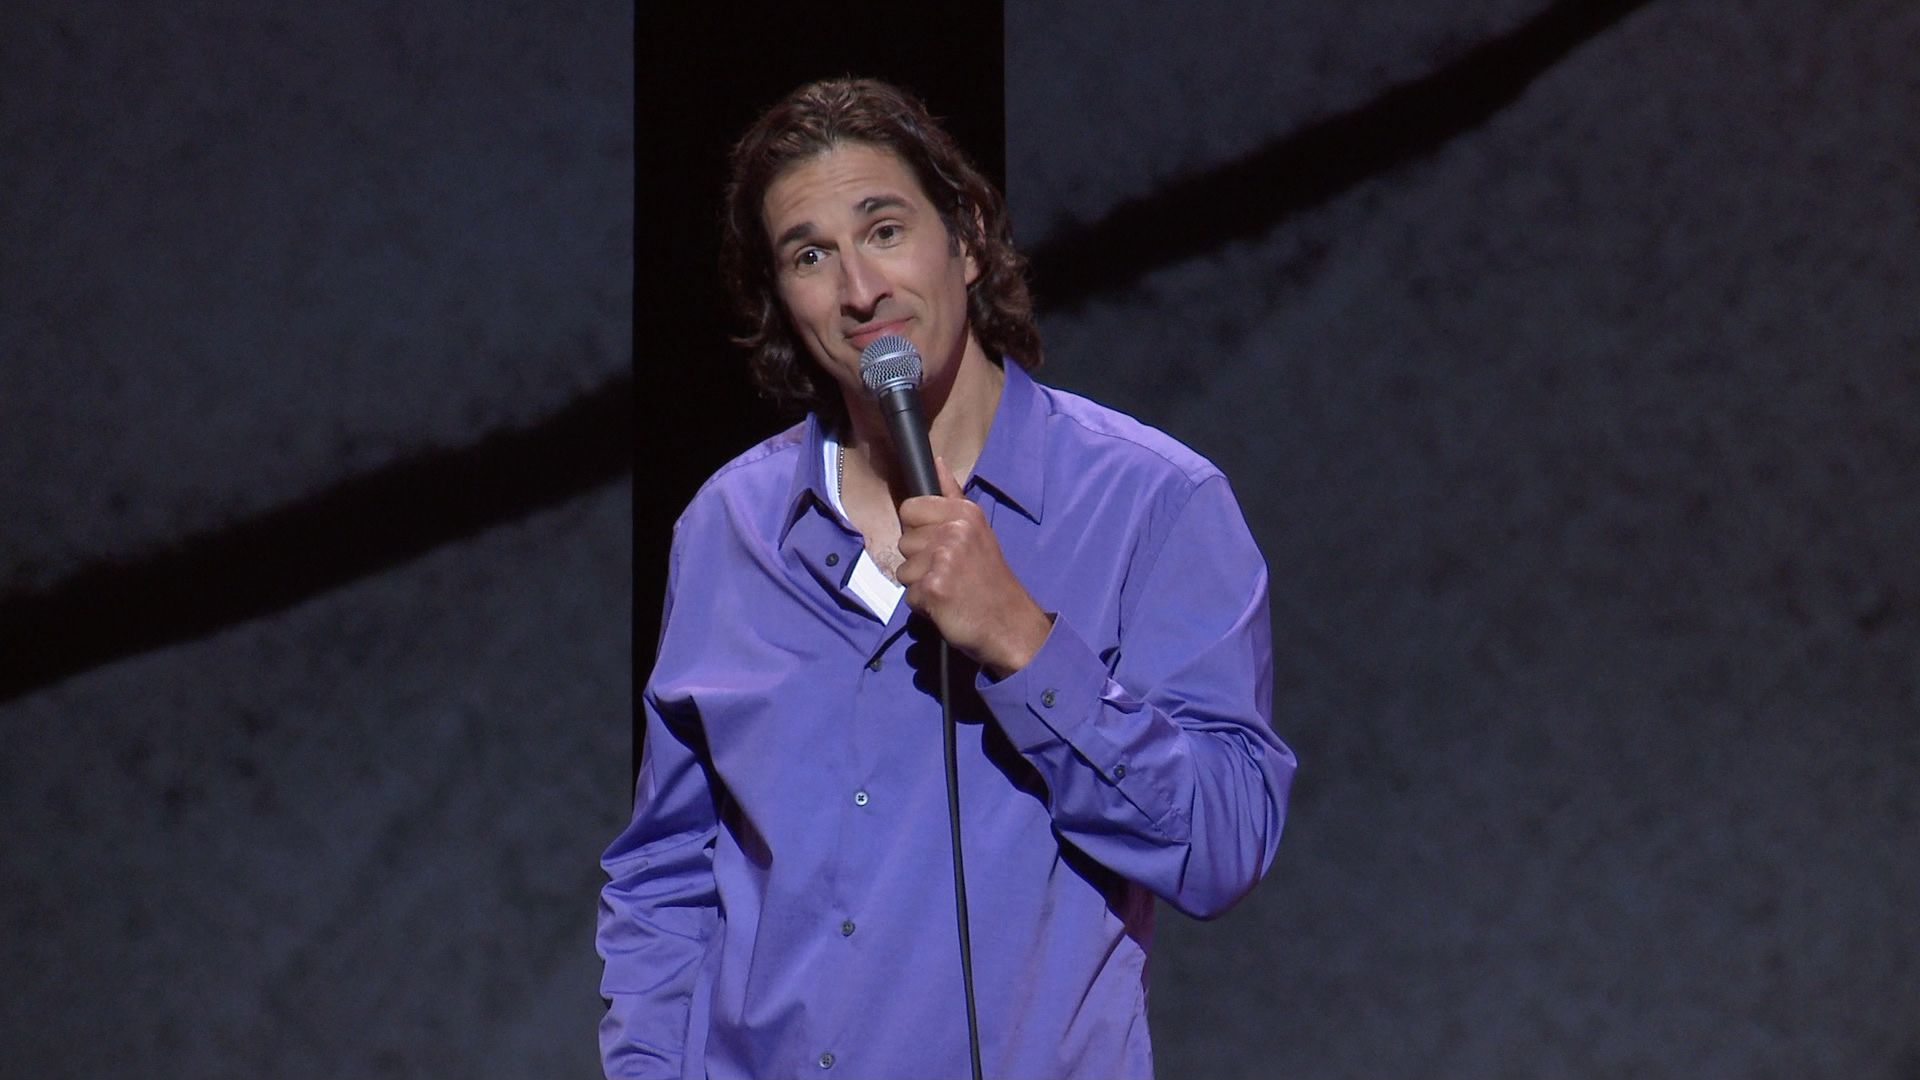 Gary Gulman: In This Economy? images.